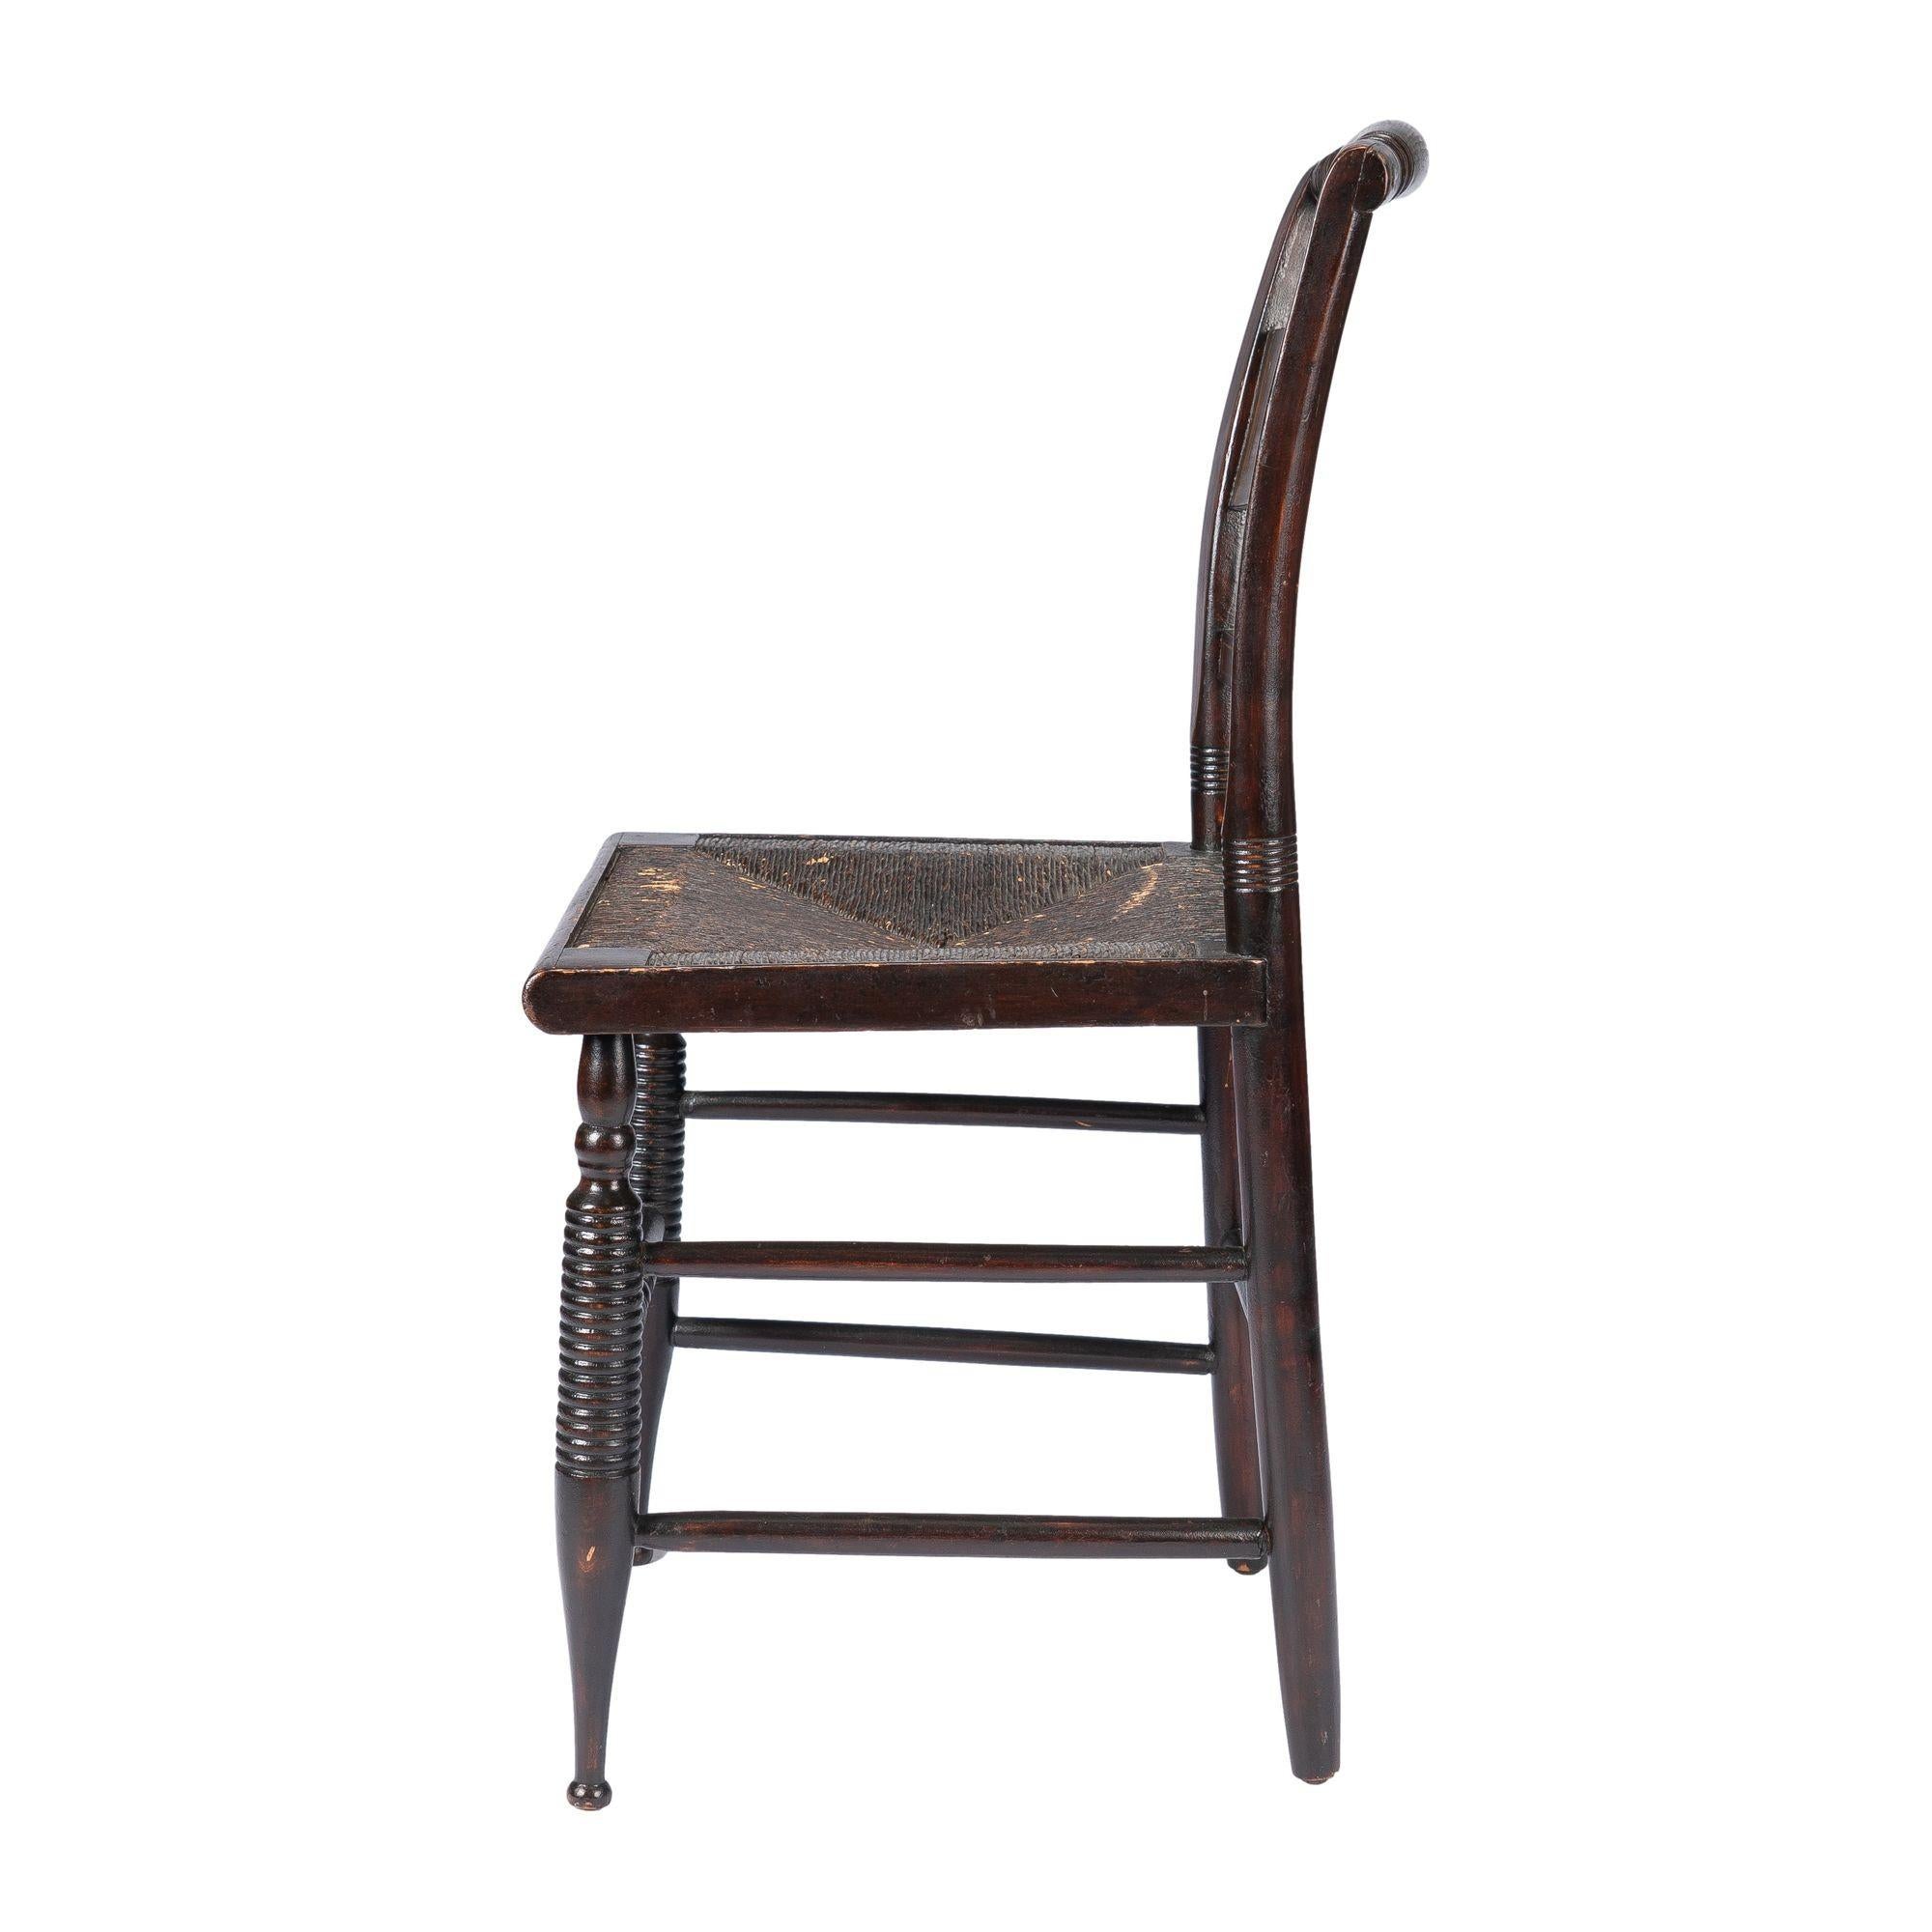 Sheraton Connecticut Valley Hitchcock rush seat side chair, 1820 For Sale